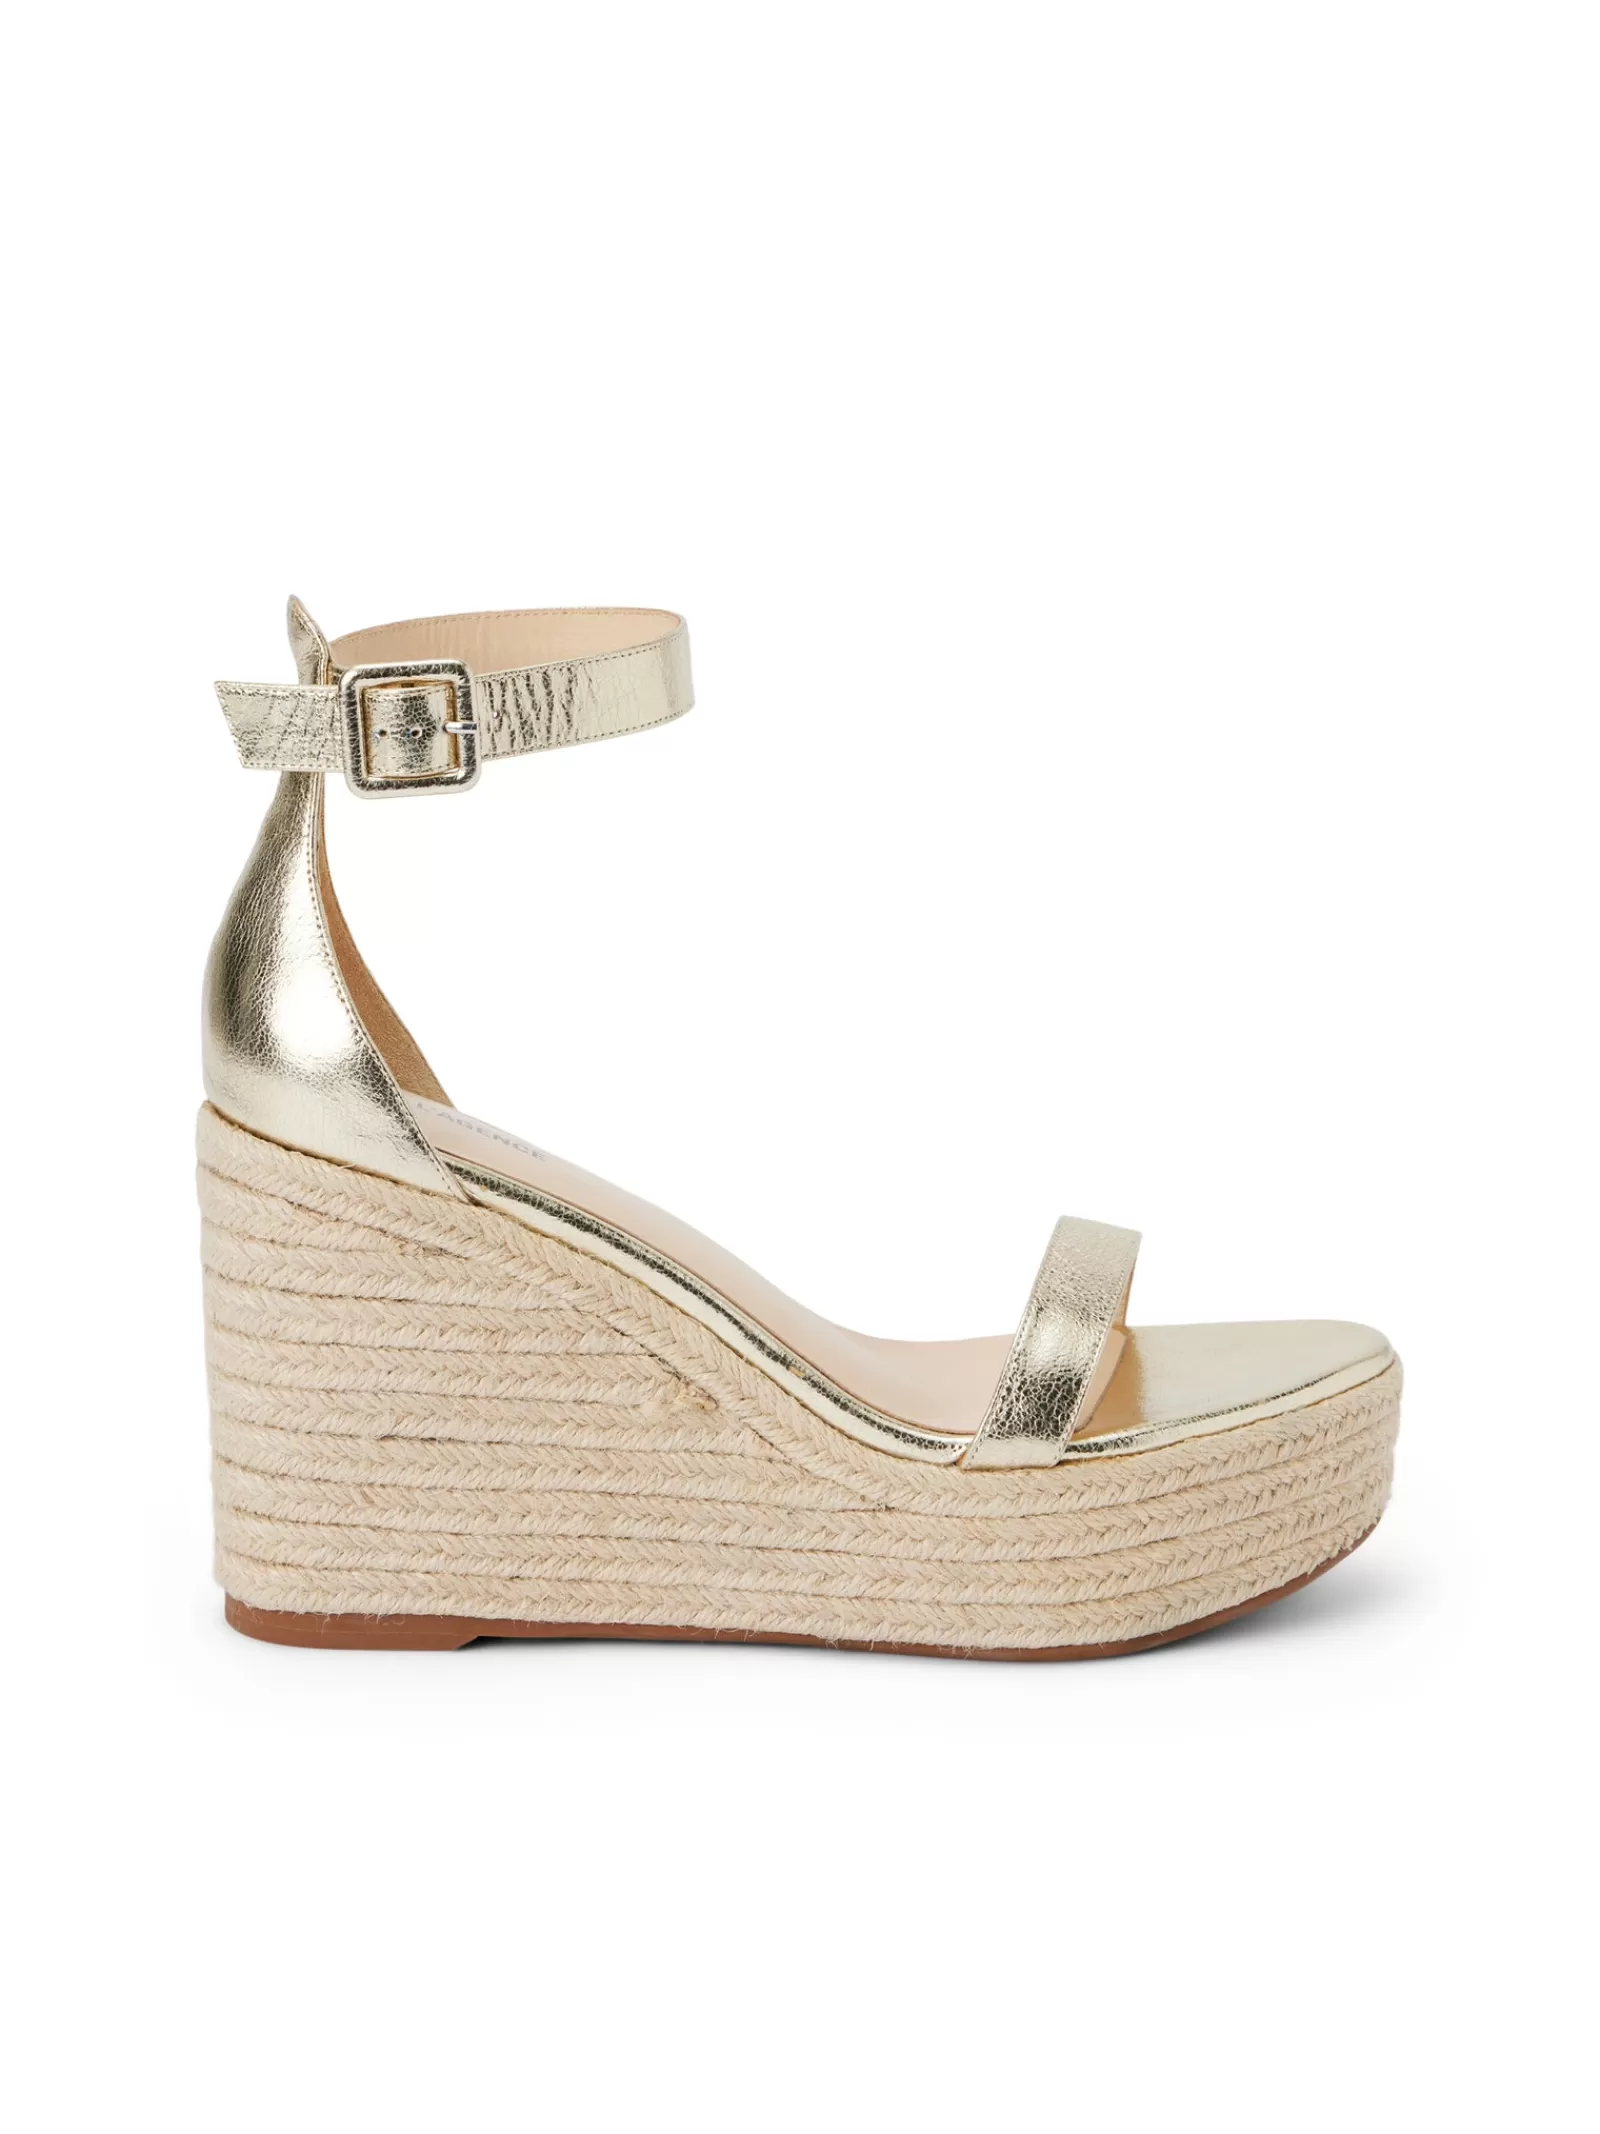 L'AGENCE Avice Wedge Espadrille< Spring Collection | Heels & Pumps